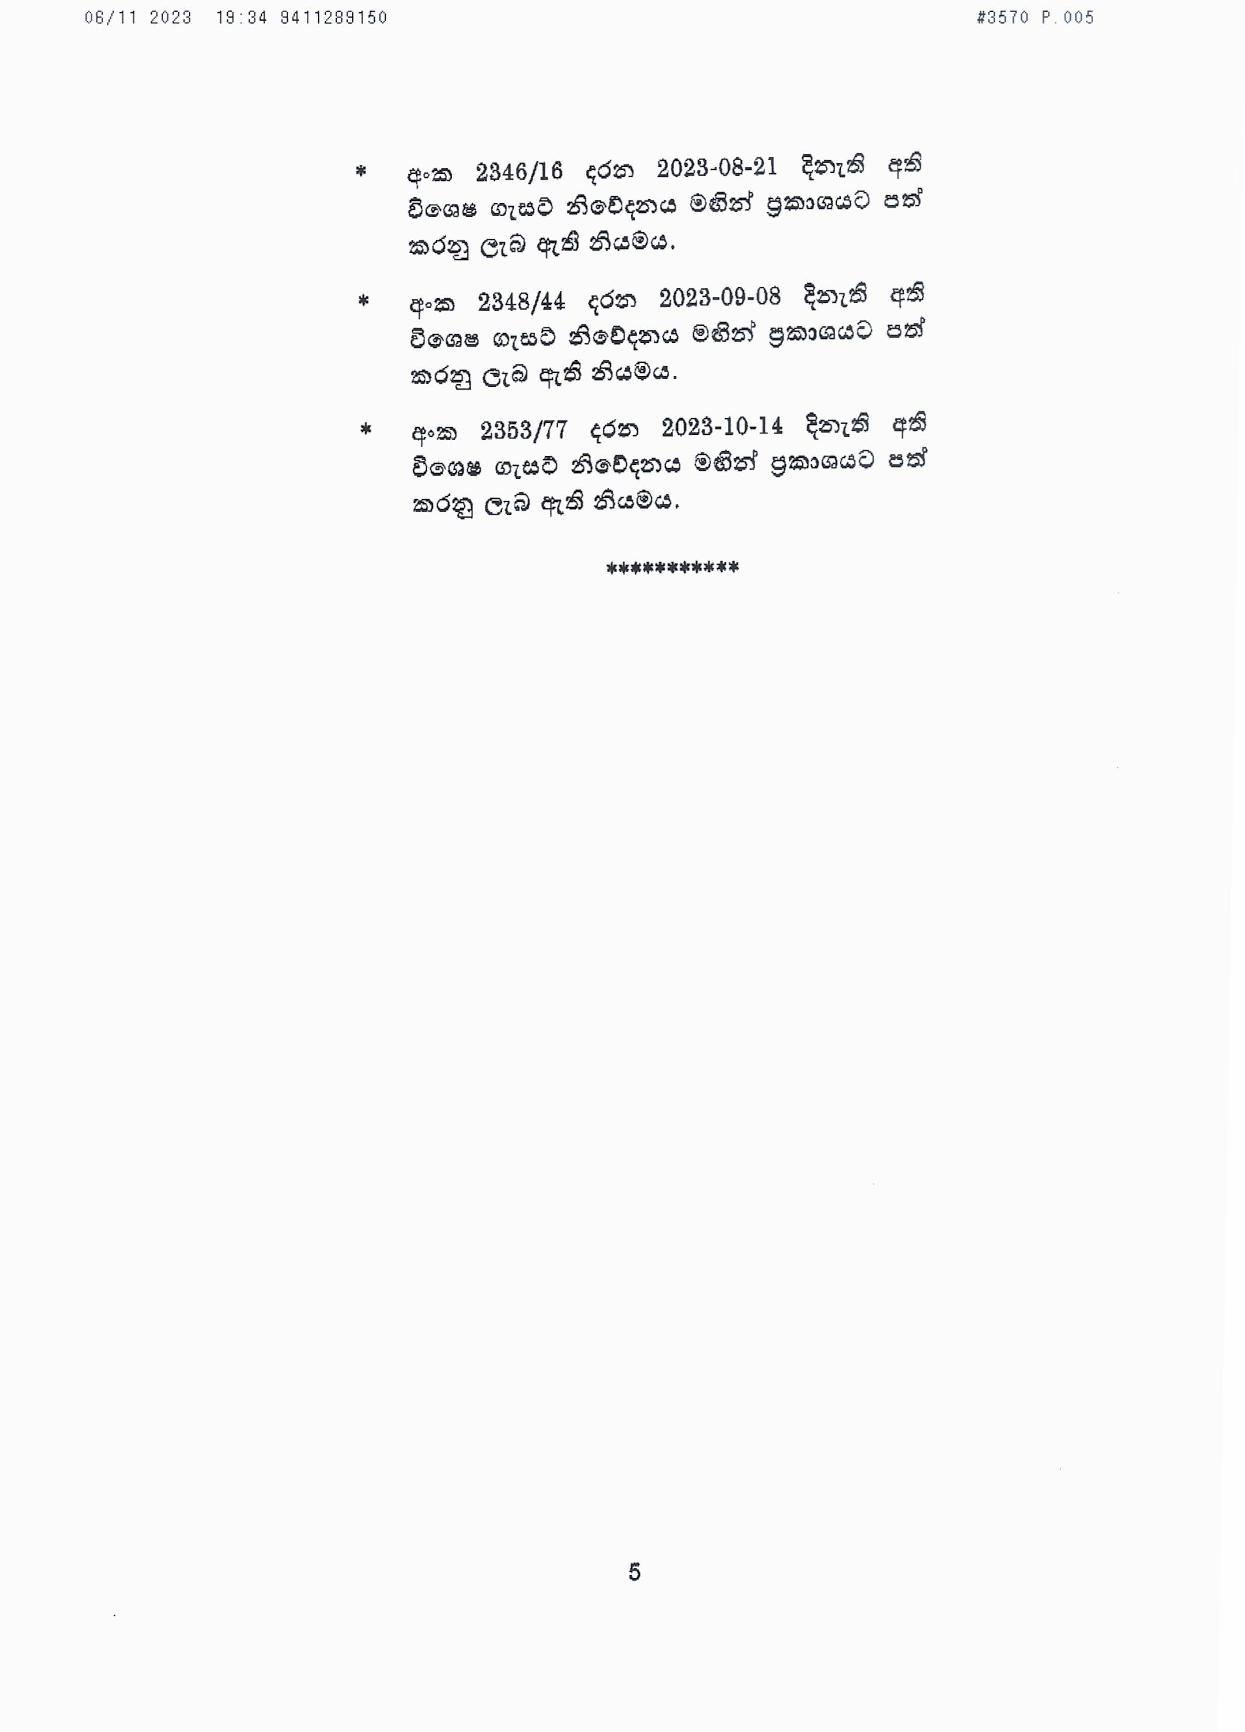 Cabinet Decision on 06.11.2023 page 005